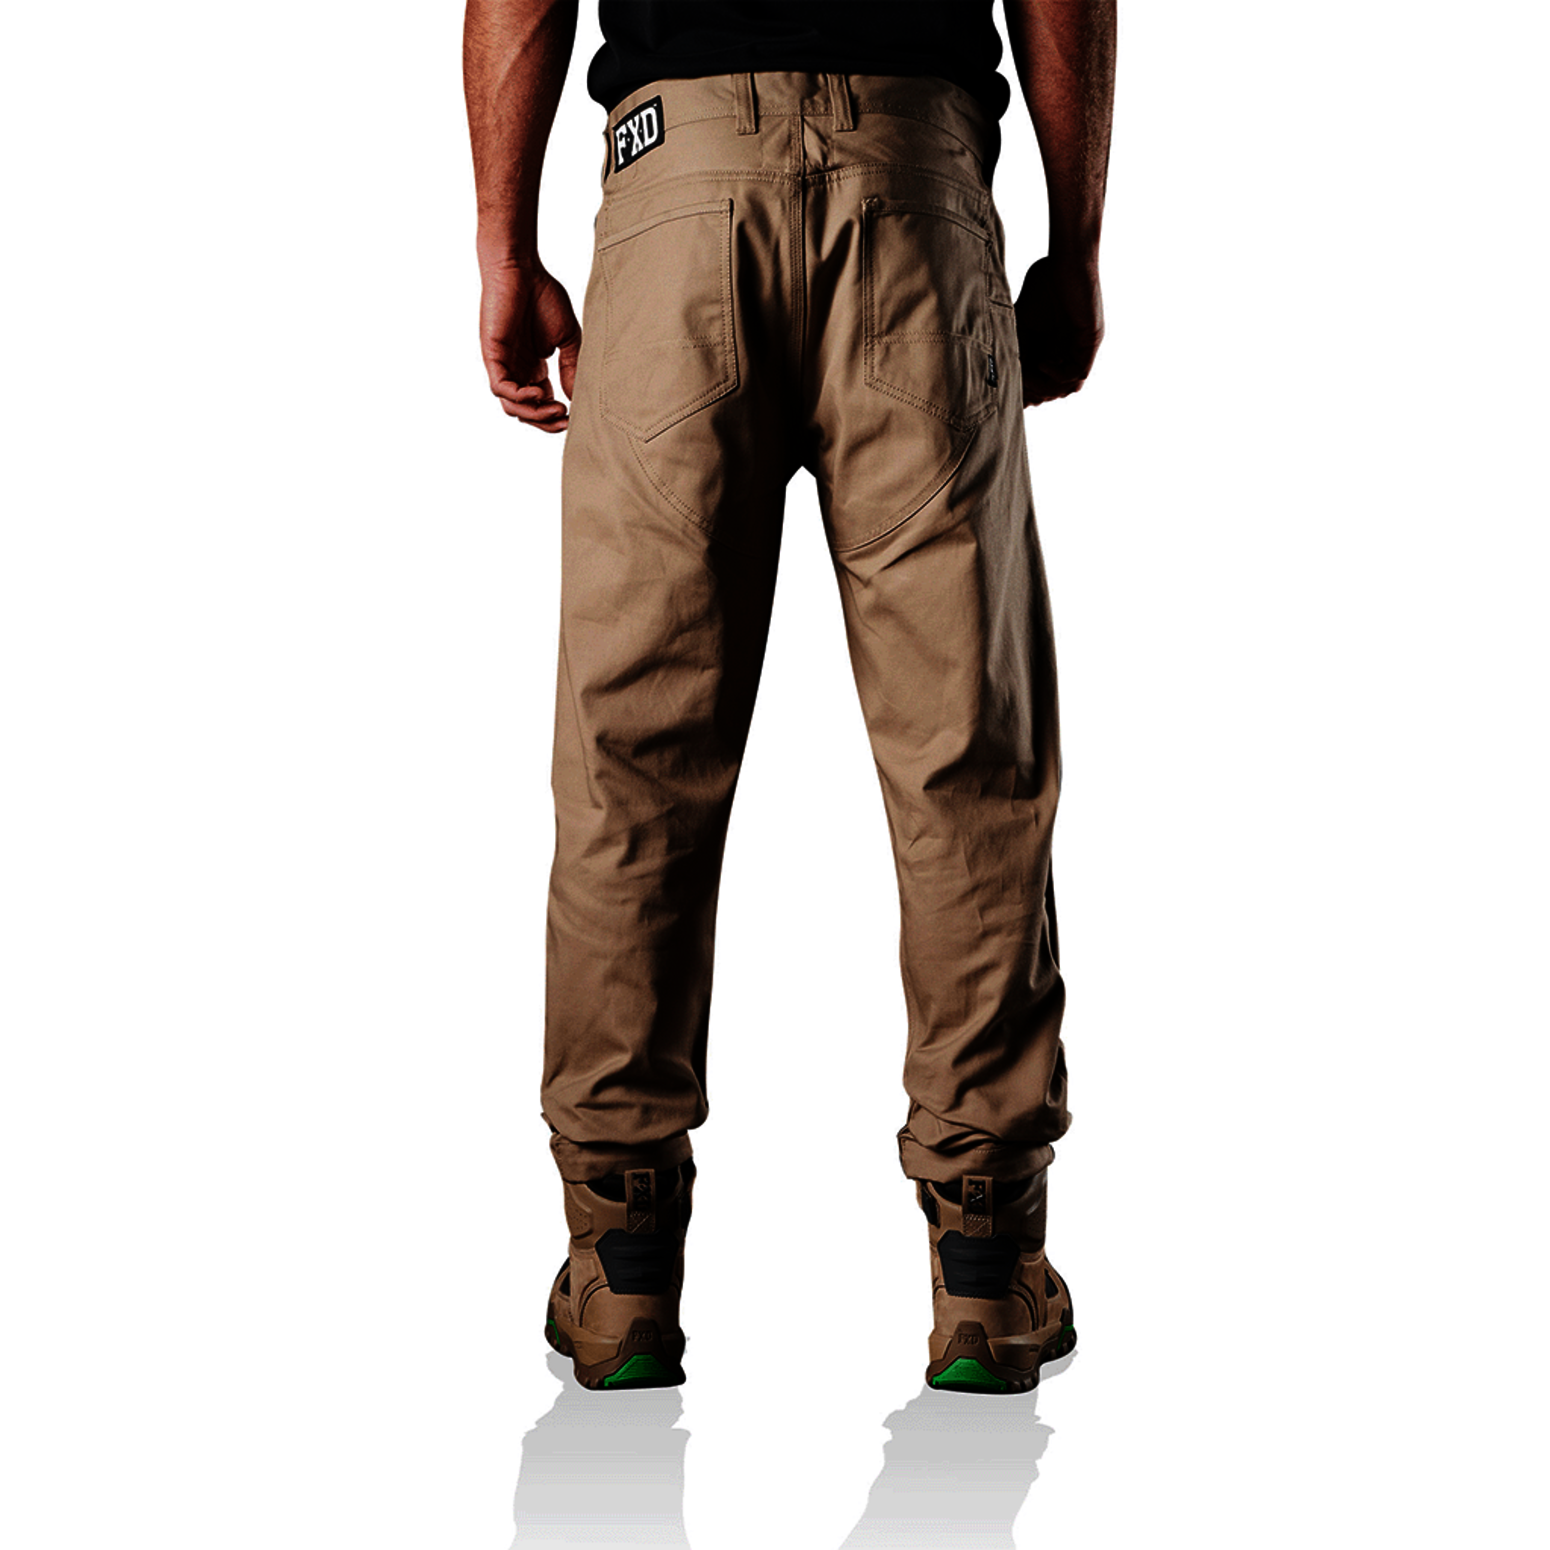 FXD WP-2 Work Pant - Khaki size 38 one pair only